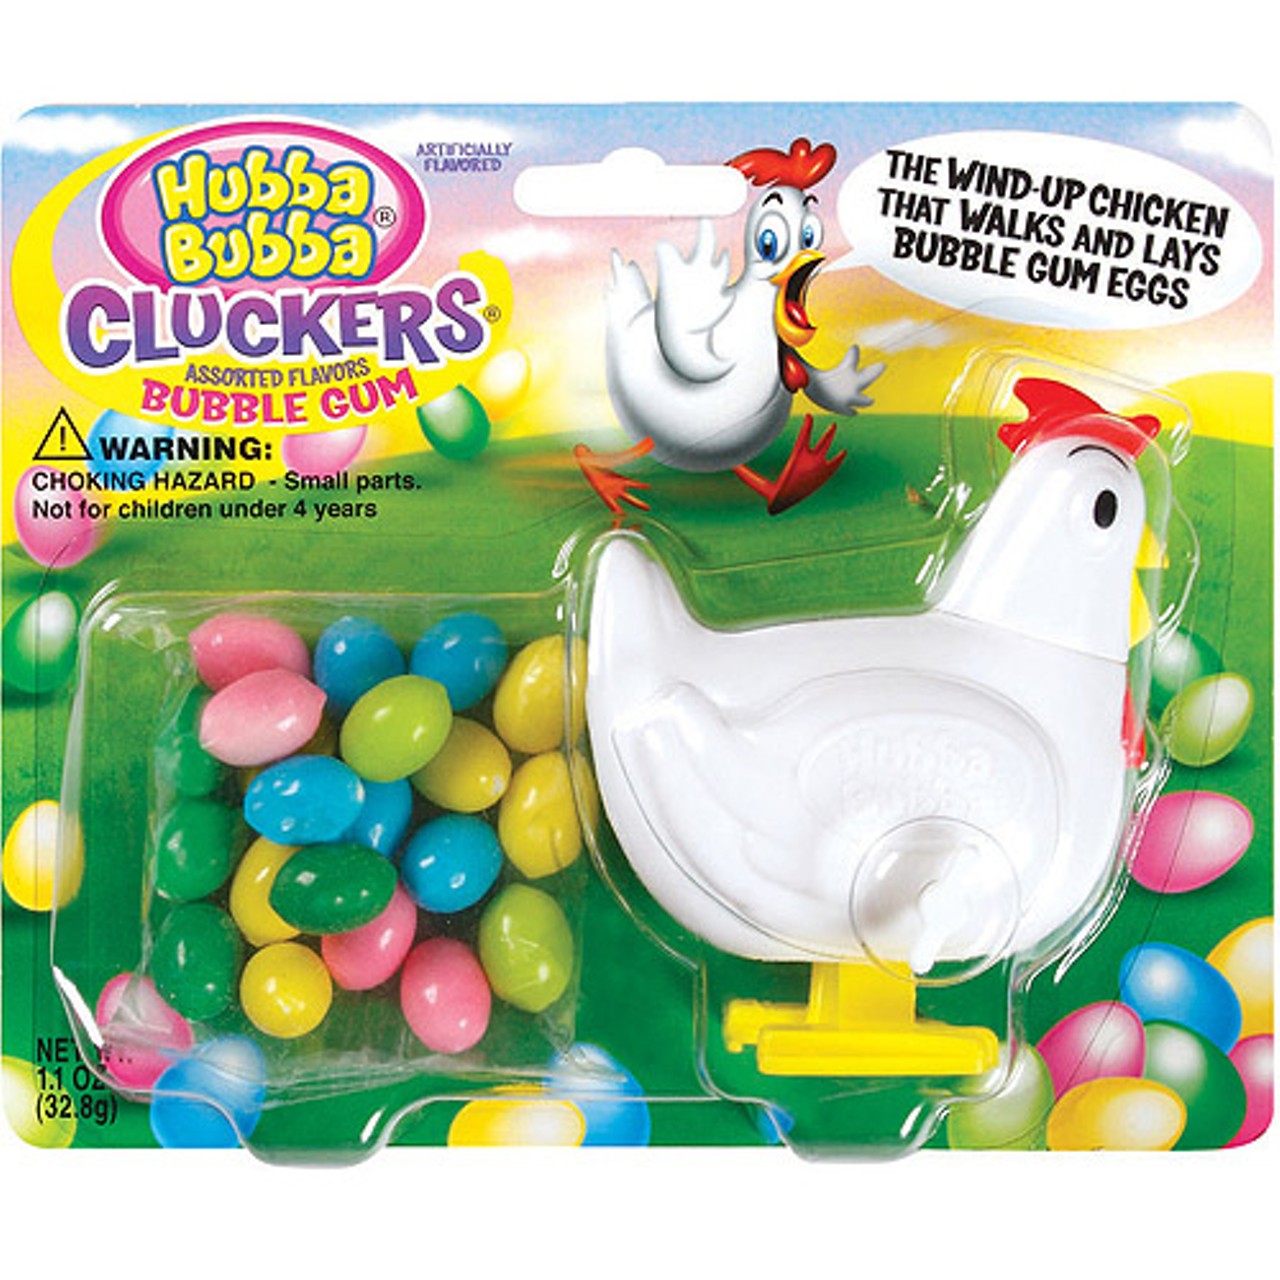 The Worst
Cluckers, the Gumball-Egg-Pooping Chicken
Perhaps because we're not a six-year-old boy, Gut Check fails to see the charm in animal-shaped candy dispensers that poop brown jelly beans. Frankly, we don't get it.
When Cluckers the egg-laying chicken (note: inexplicably not labeled a hen?) takes a dump, at least she shits colorful Hubba Bubba bubblegum Easter eggs. To provoke Cluckers' biological urges, the user must twist off her head, insert four eggs in her chute, replace her head and wind her up.
Although the label is very specific that the "dispenser is for the provided gum balls only," nowhere on the packaging nor parent company Wrigley's website will you be able to find information on how to get more specially shaped eggs. More dauntingly, the label also warns: "Please wash dispenser thoroughly before use." Who knows where this thing's been!